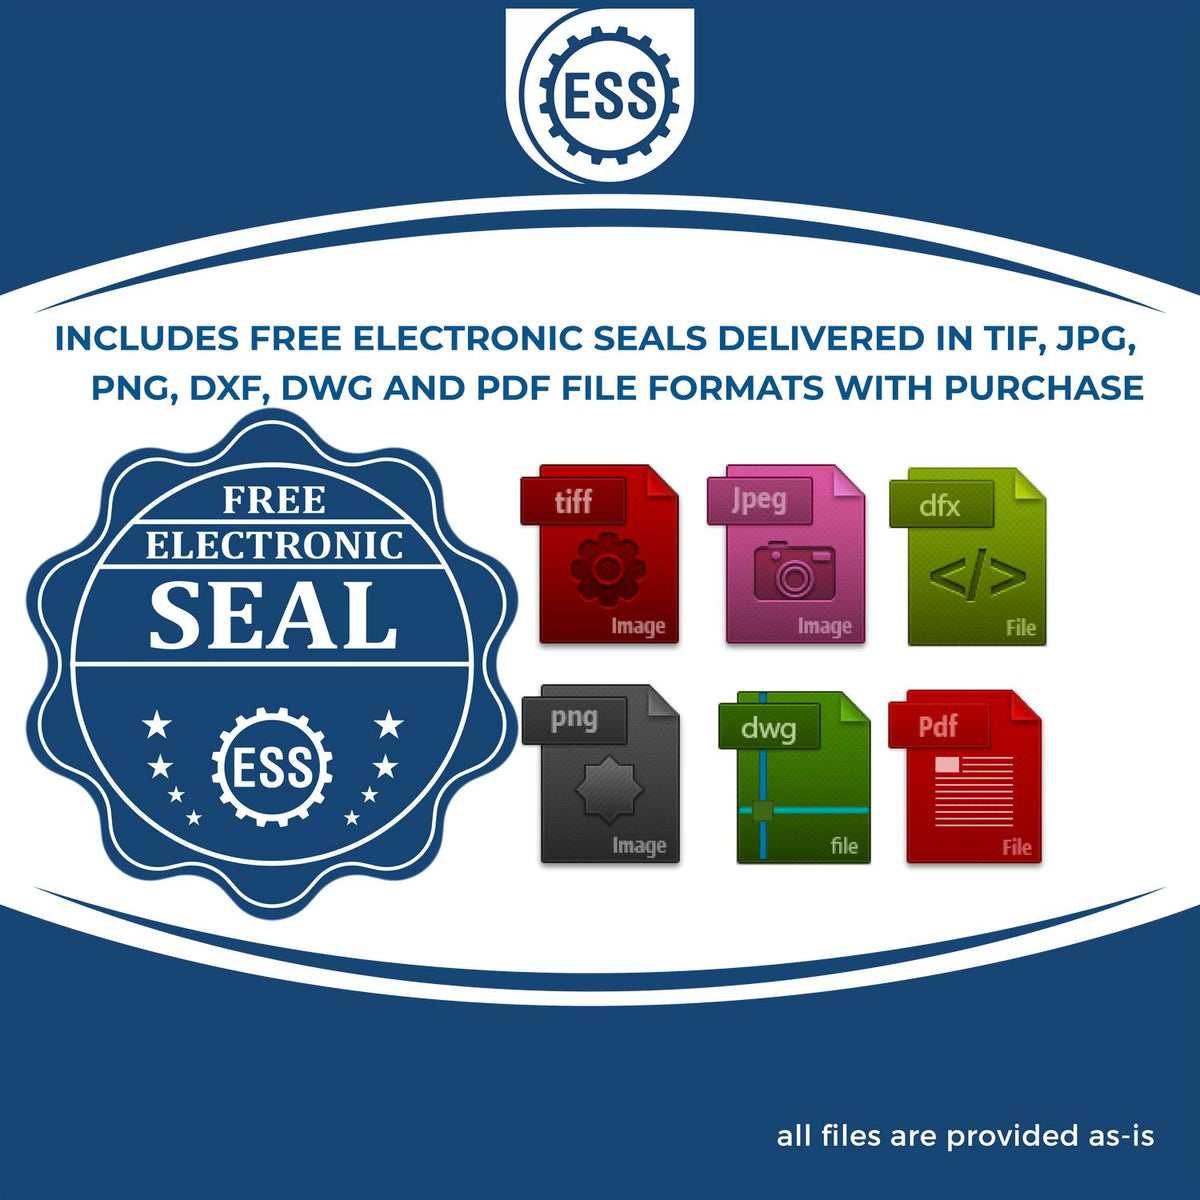 An infographic for the free electronic seal for the State of Arkansas Extended Long Reach Geologist Seal illustrating the different file type icons such as DXF, DWG, TIF, JPG and PNG.